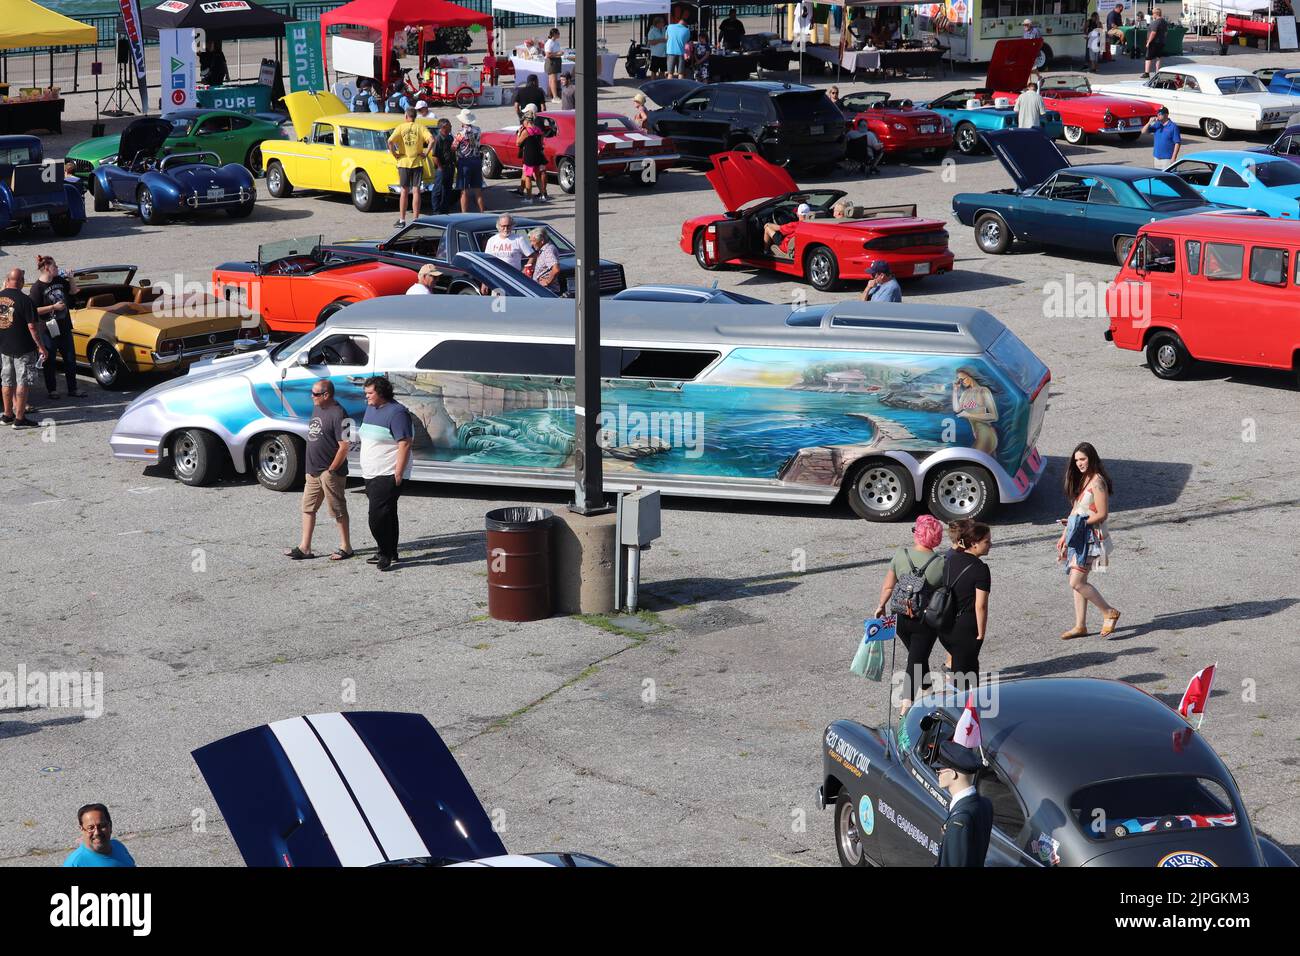 Annual Ouellette Car Cruise Show event at Windsor waterfront Stock Photo